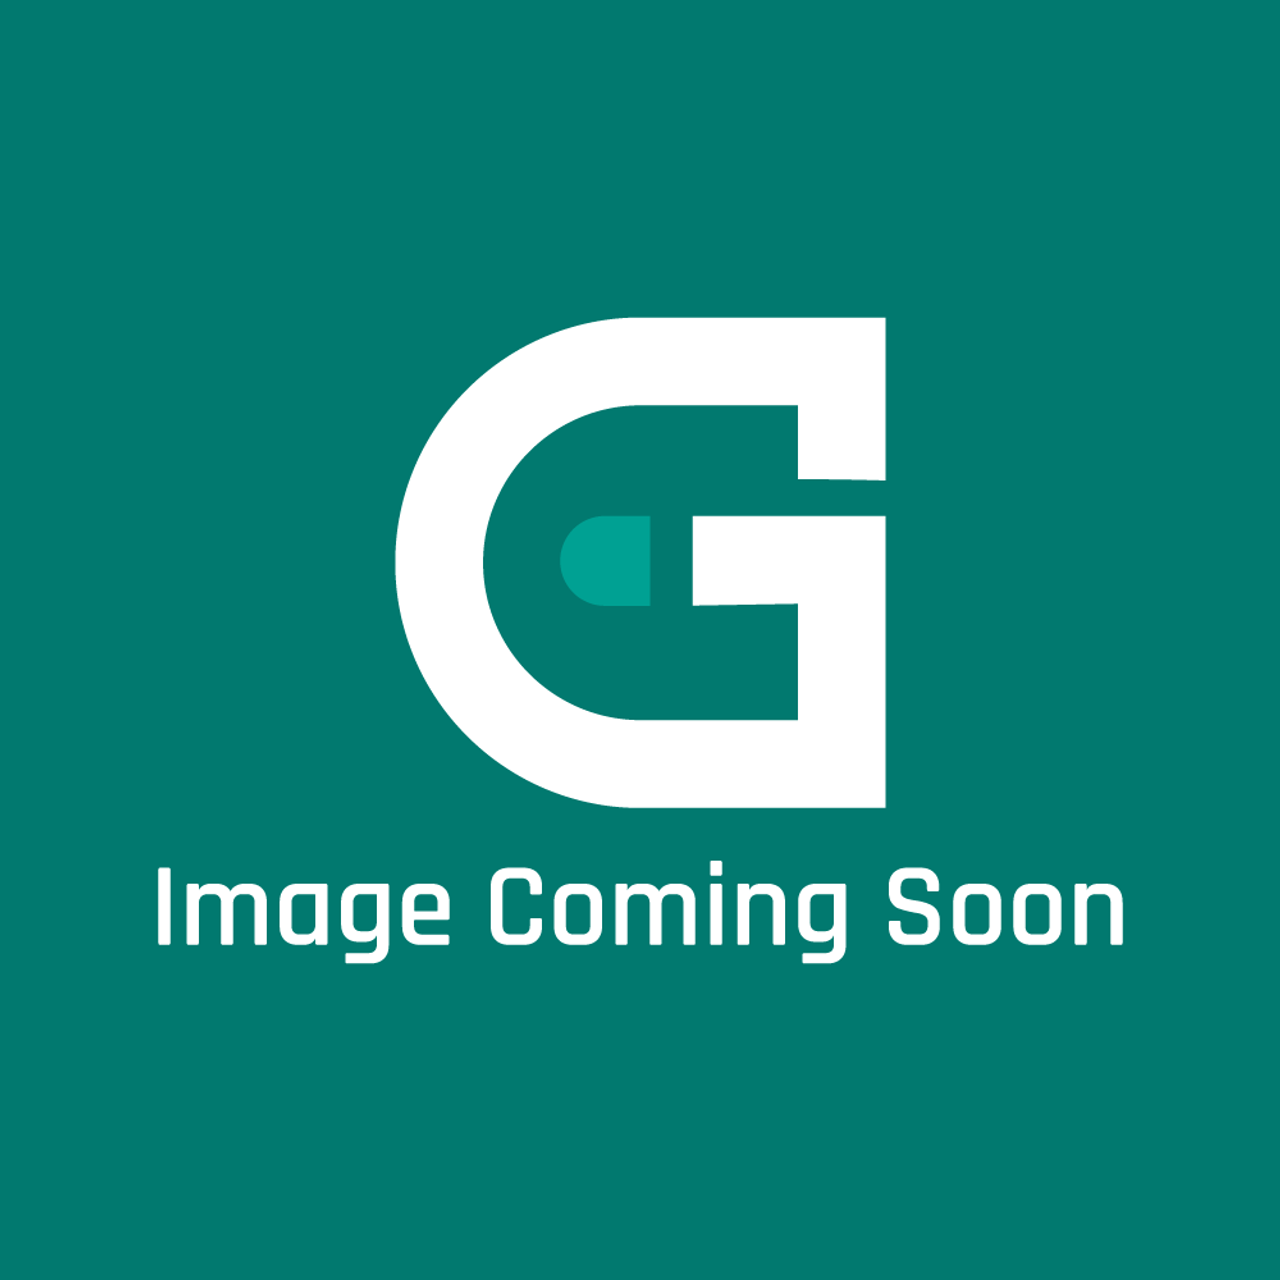 AGA Marvel AG2M212336 - Vent Fan Mounting Bracket - Image Coming Soon!